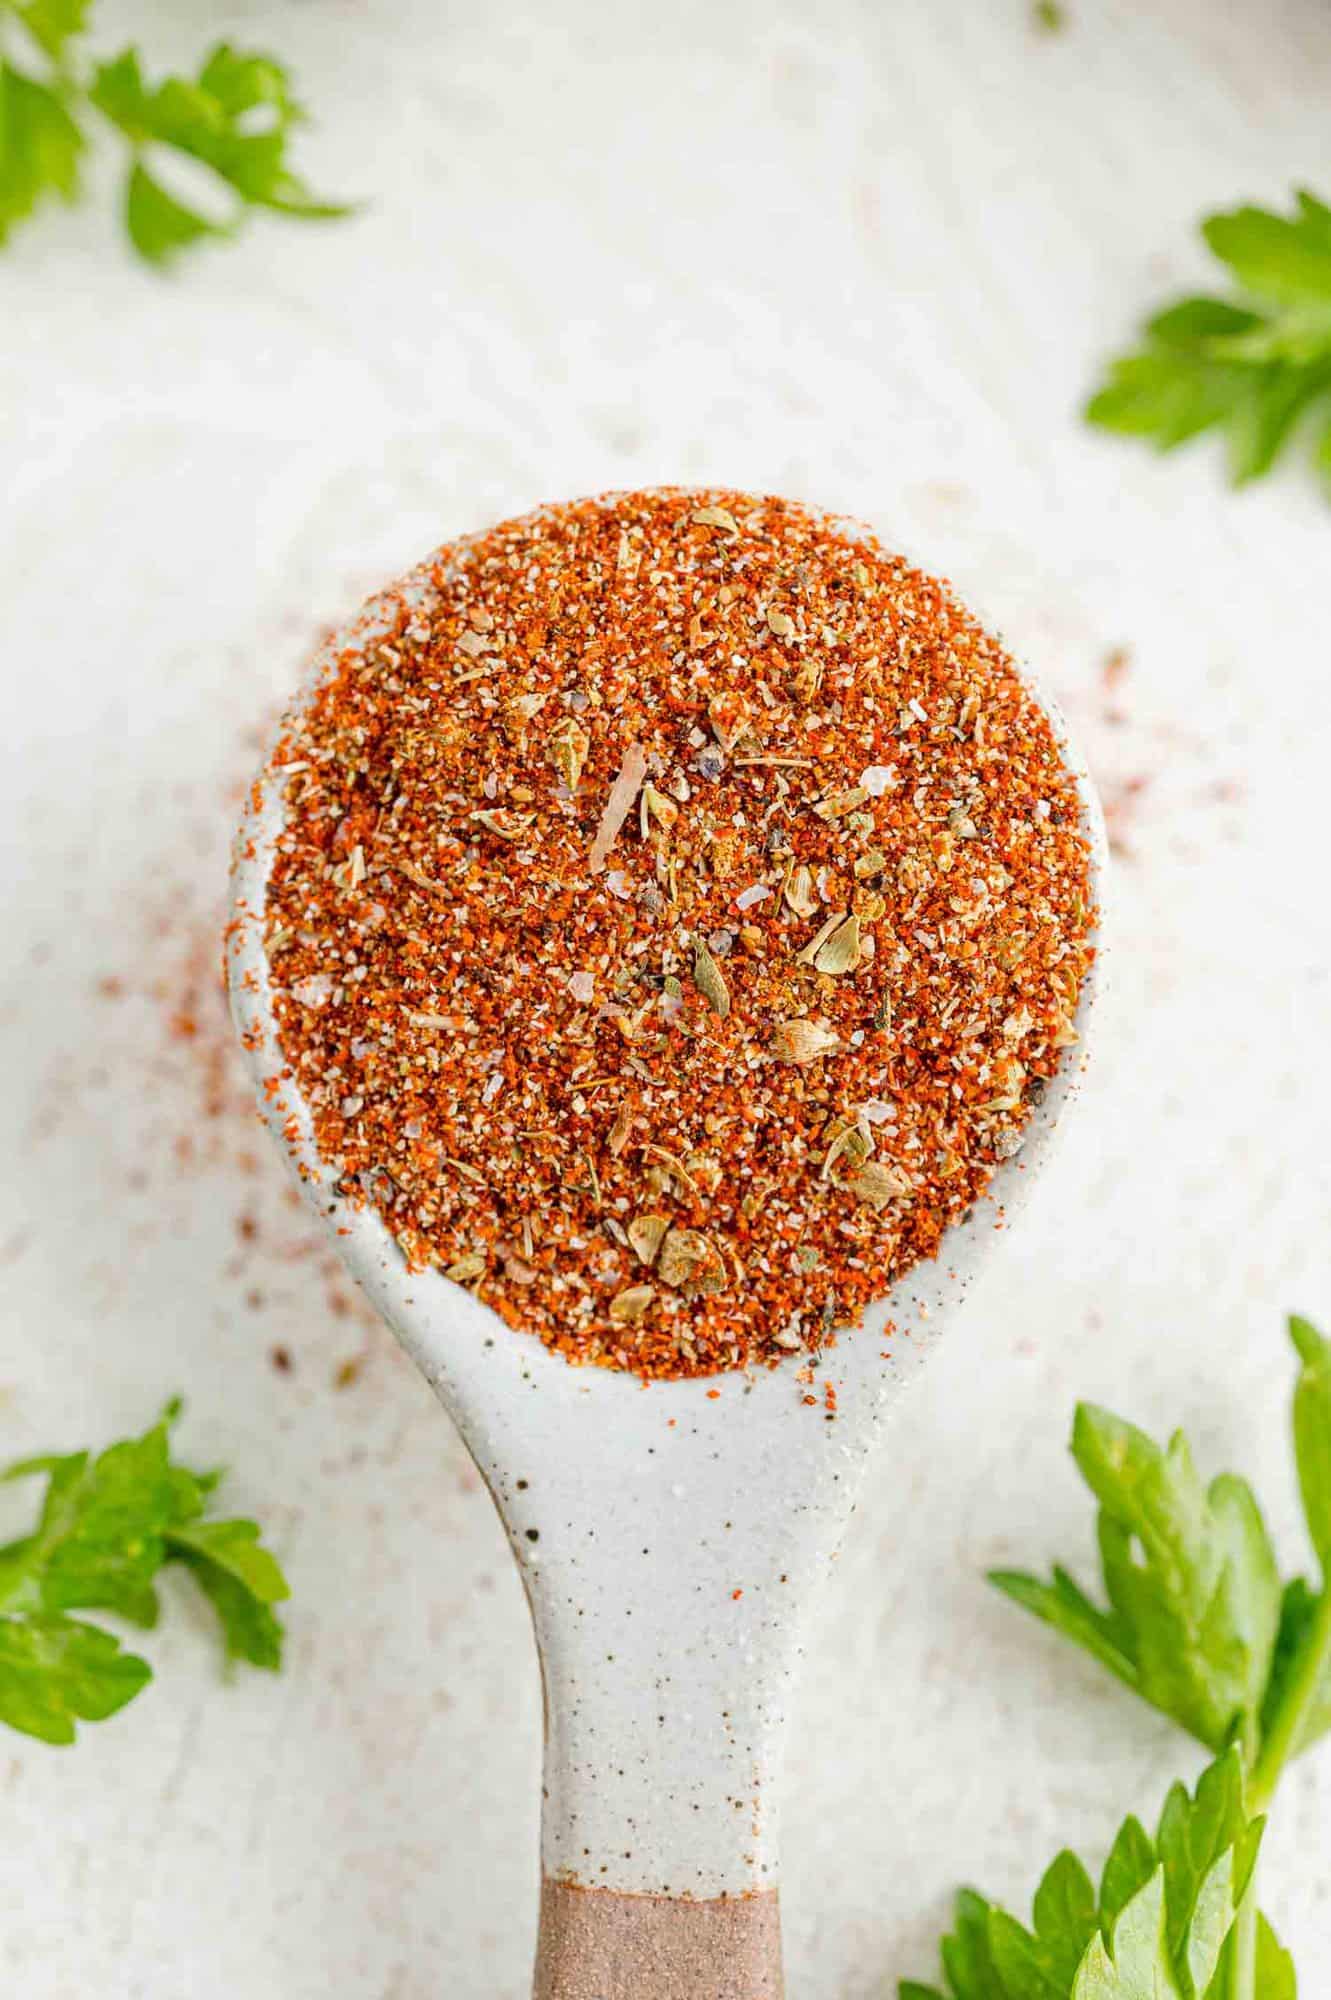 Overhead view of a spoonful of Southwest spice blend.